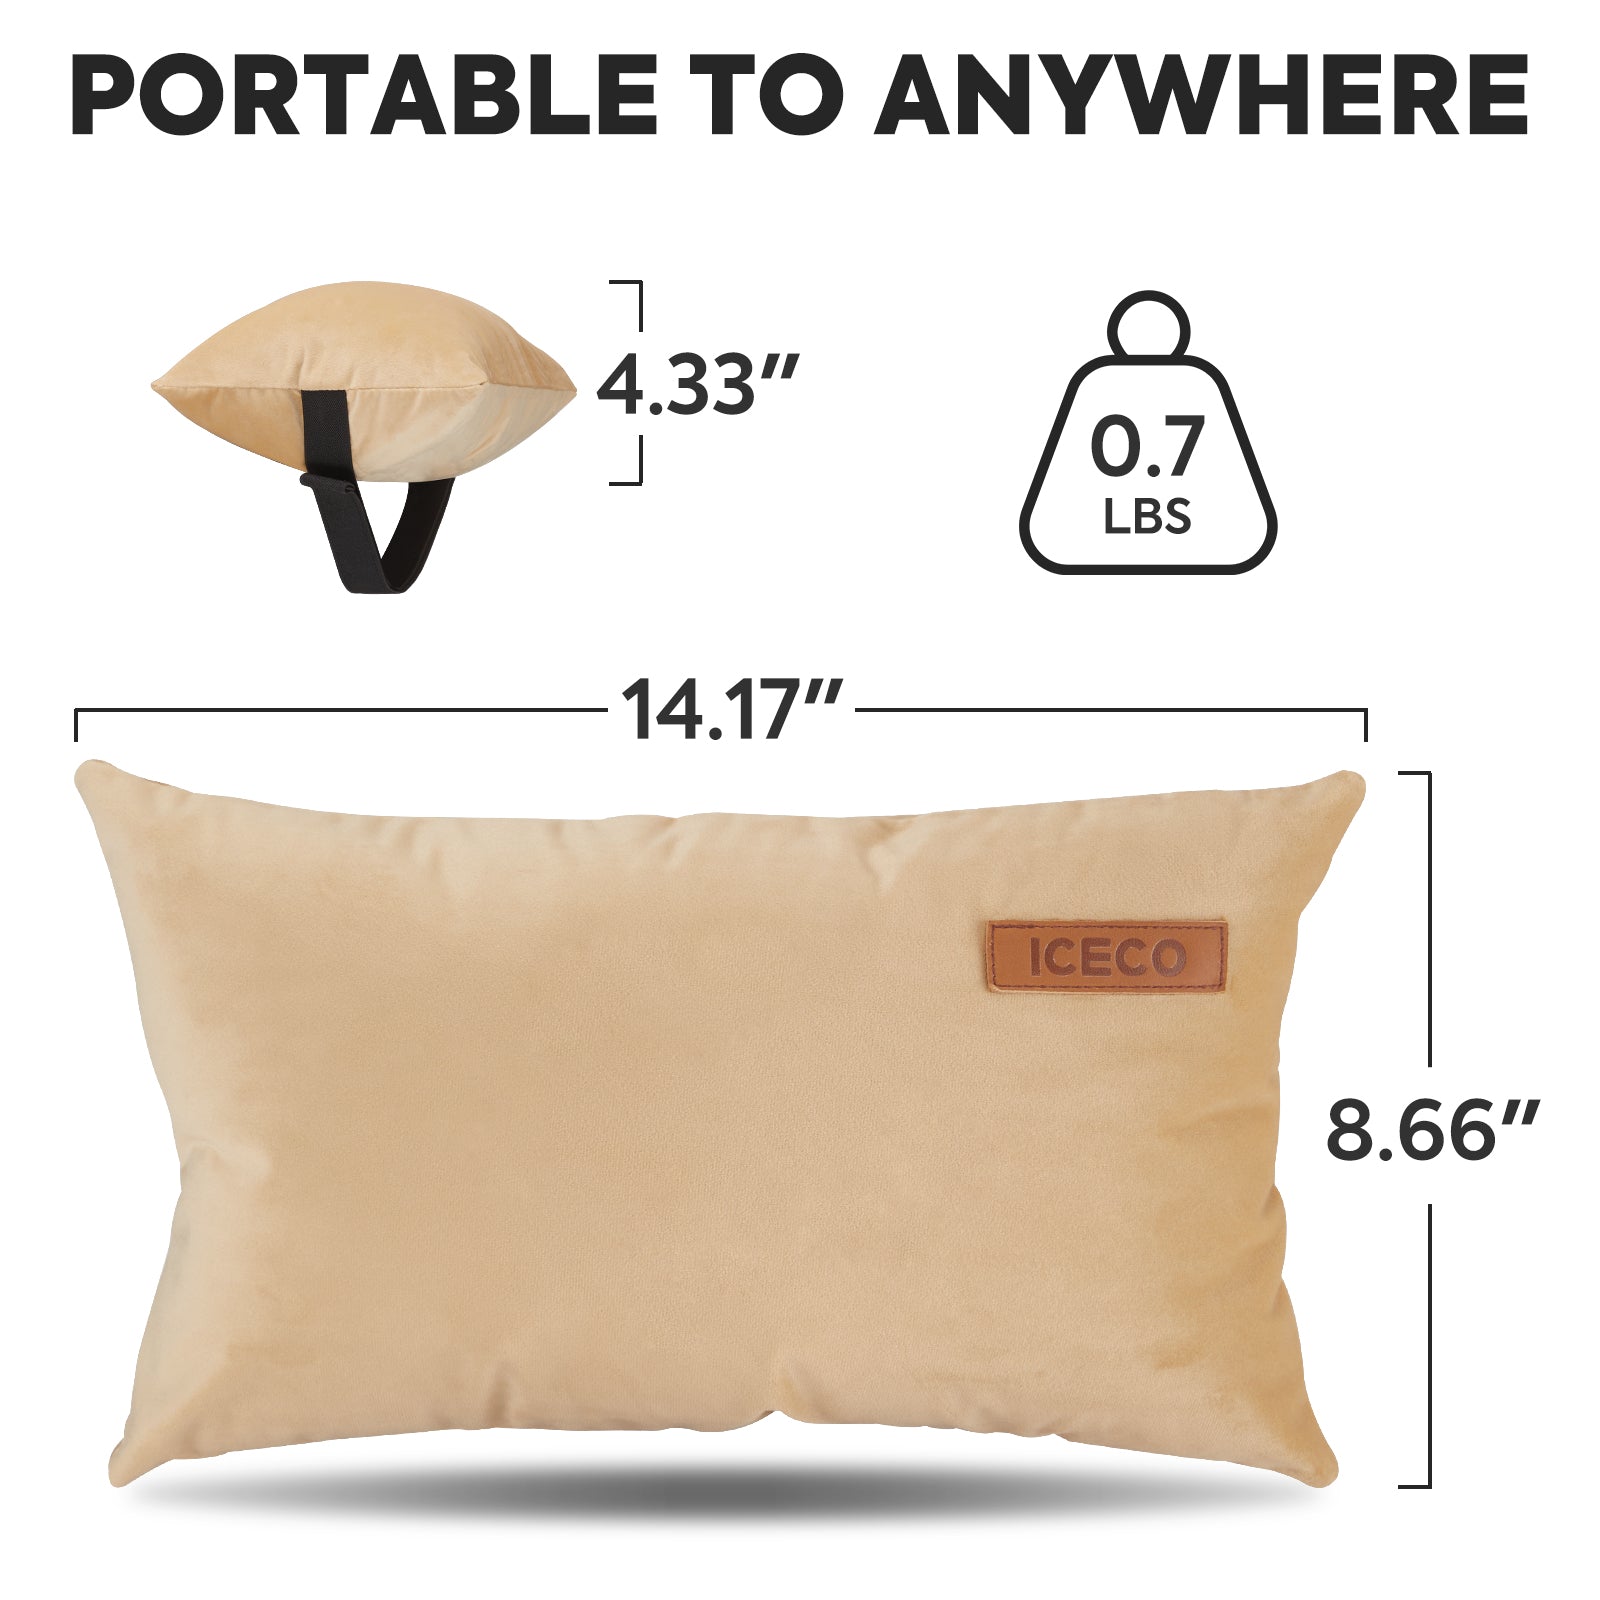 Ultralight Camping Pillow, Portable Travel Pillow | ICECO-Warming Food Mat-www.icecofreezer.com